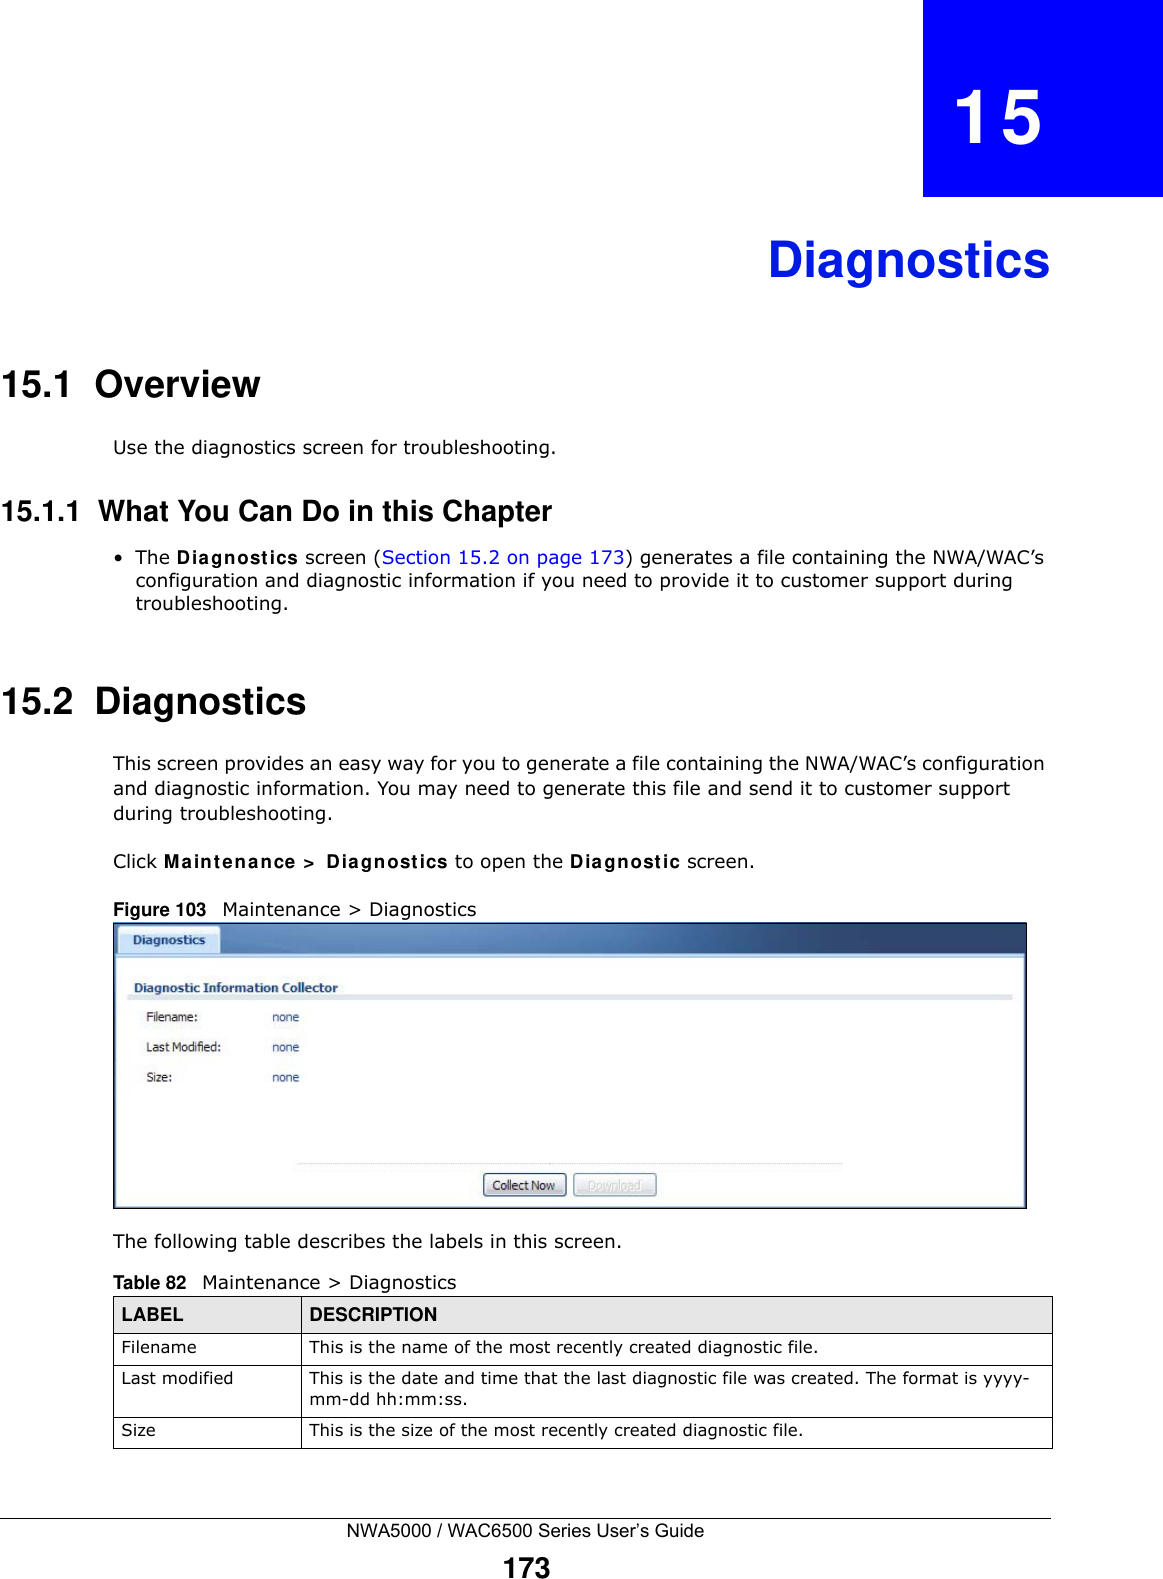 NWA5000 / WAC6500 Series User’s Guide173CHAPTER   15Diagnostics15.1  OverviewUse the diagnostics screen for troubleshooting. 15.1.1  What You Can Do in this Chapter•The D ia gnost ics screen (Section 15.2 on page 173) generates a file containing the NWA/WAC’s configuration and diagnostic information if you need to provide it to customer support during troubleshooting.15.2  Diagnostics This screen provides an easy way for you to generate a file containing the NWA/WAC’s configuration and diagnostic information. You may need to generate this file and send it to customer support during troubleshooting.Click M ainte nan ce  &gt;  Diagnost ics to open the Diagnost ic screen. Figure 103   Maintenance &gt; Diagnostics  The following table describes the labels in this screen.  Table 82   Maintenance &gt; DiagnosticsLABEL DESCRIPTIONFilename This is the name of the most recently created diagnostic file.Last modified This is the date and time that the last diagnostic file was created. The format is yyyy-mm-dd hh:mm:ss.Size This is the size of the most recently created diagnostic file.